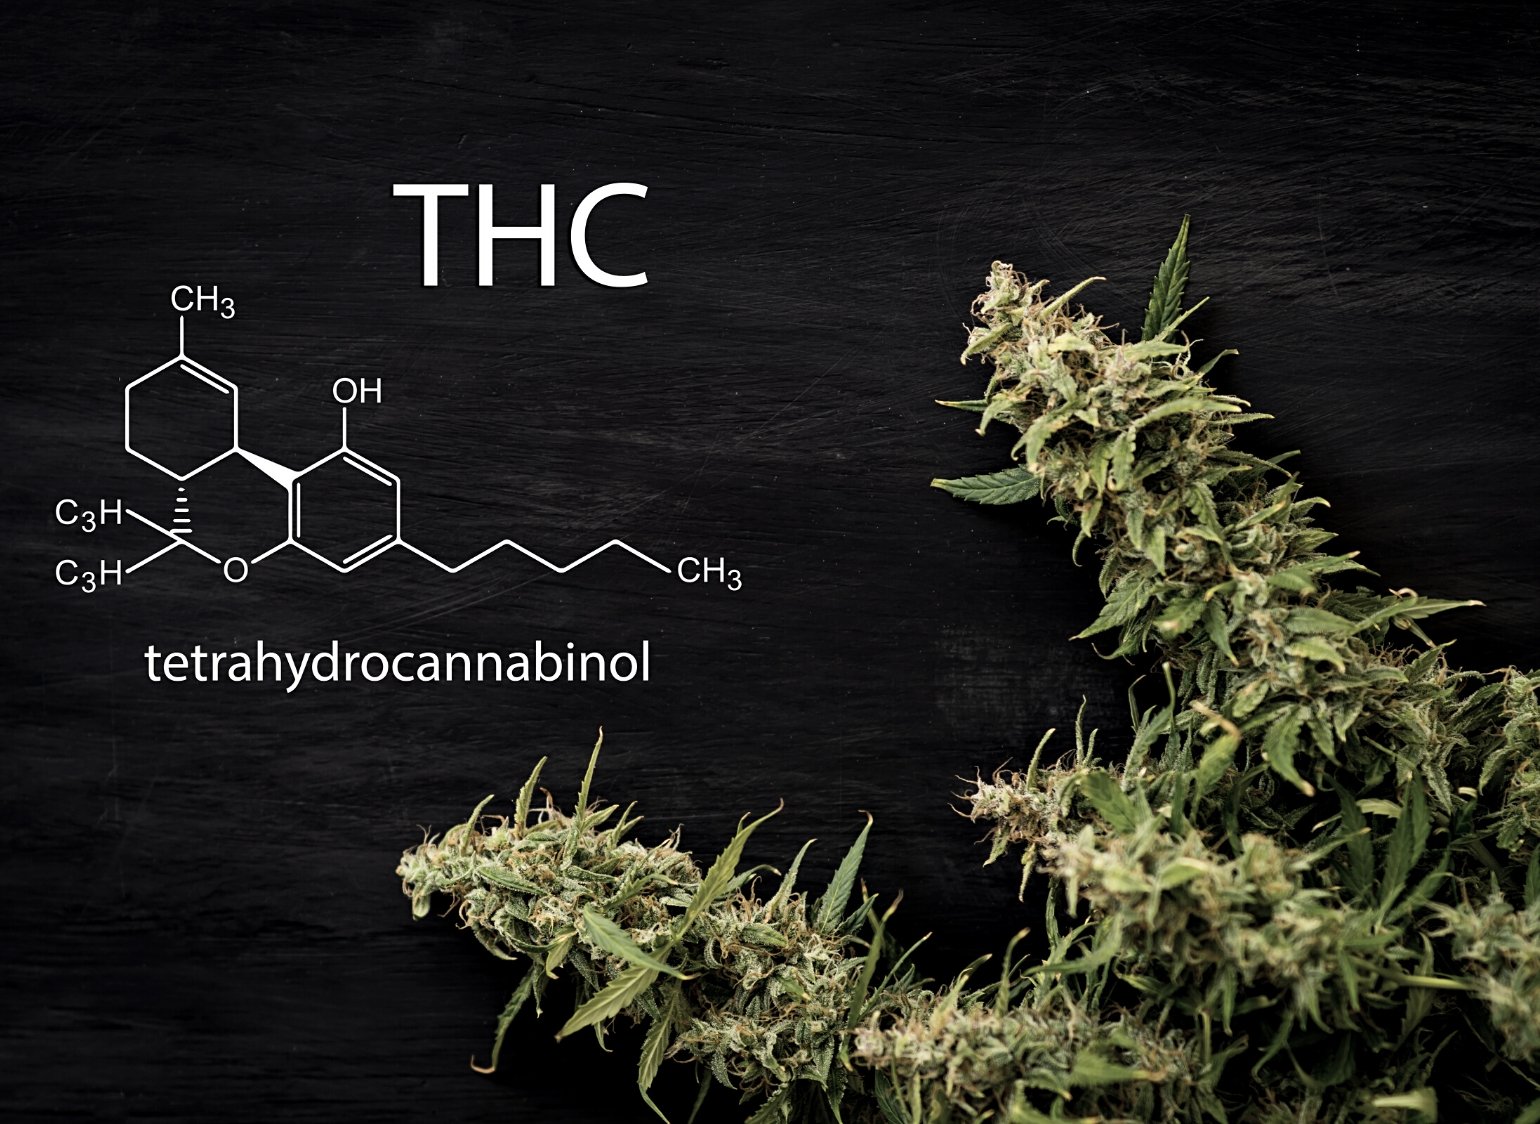 Dive into the world of tetrahydrocannabinol (THC), the primary psychoactive compound found in cannabis. Learn about the origins of THC, its chemical structure, and how it interacts with the body's endocannabinoid system.